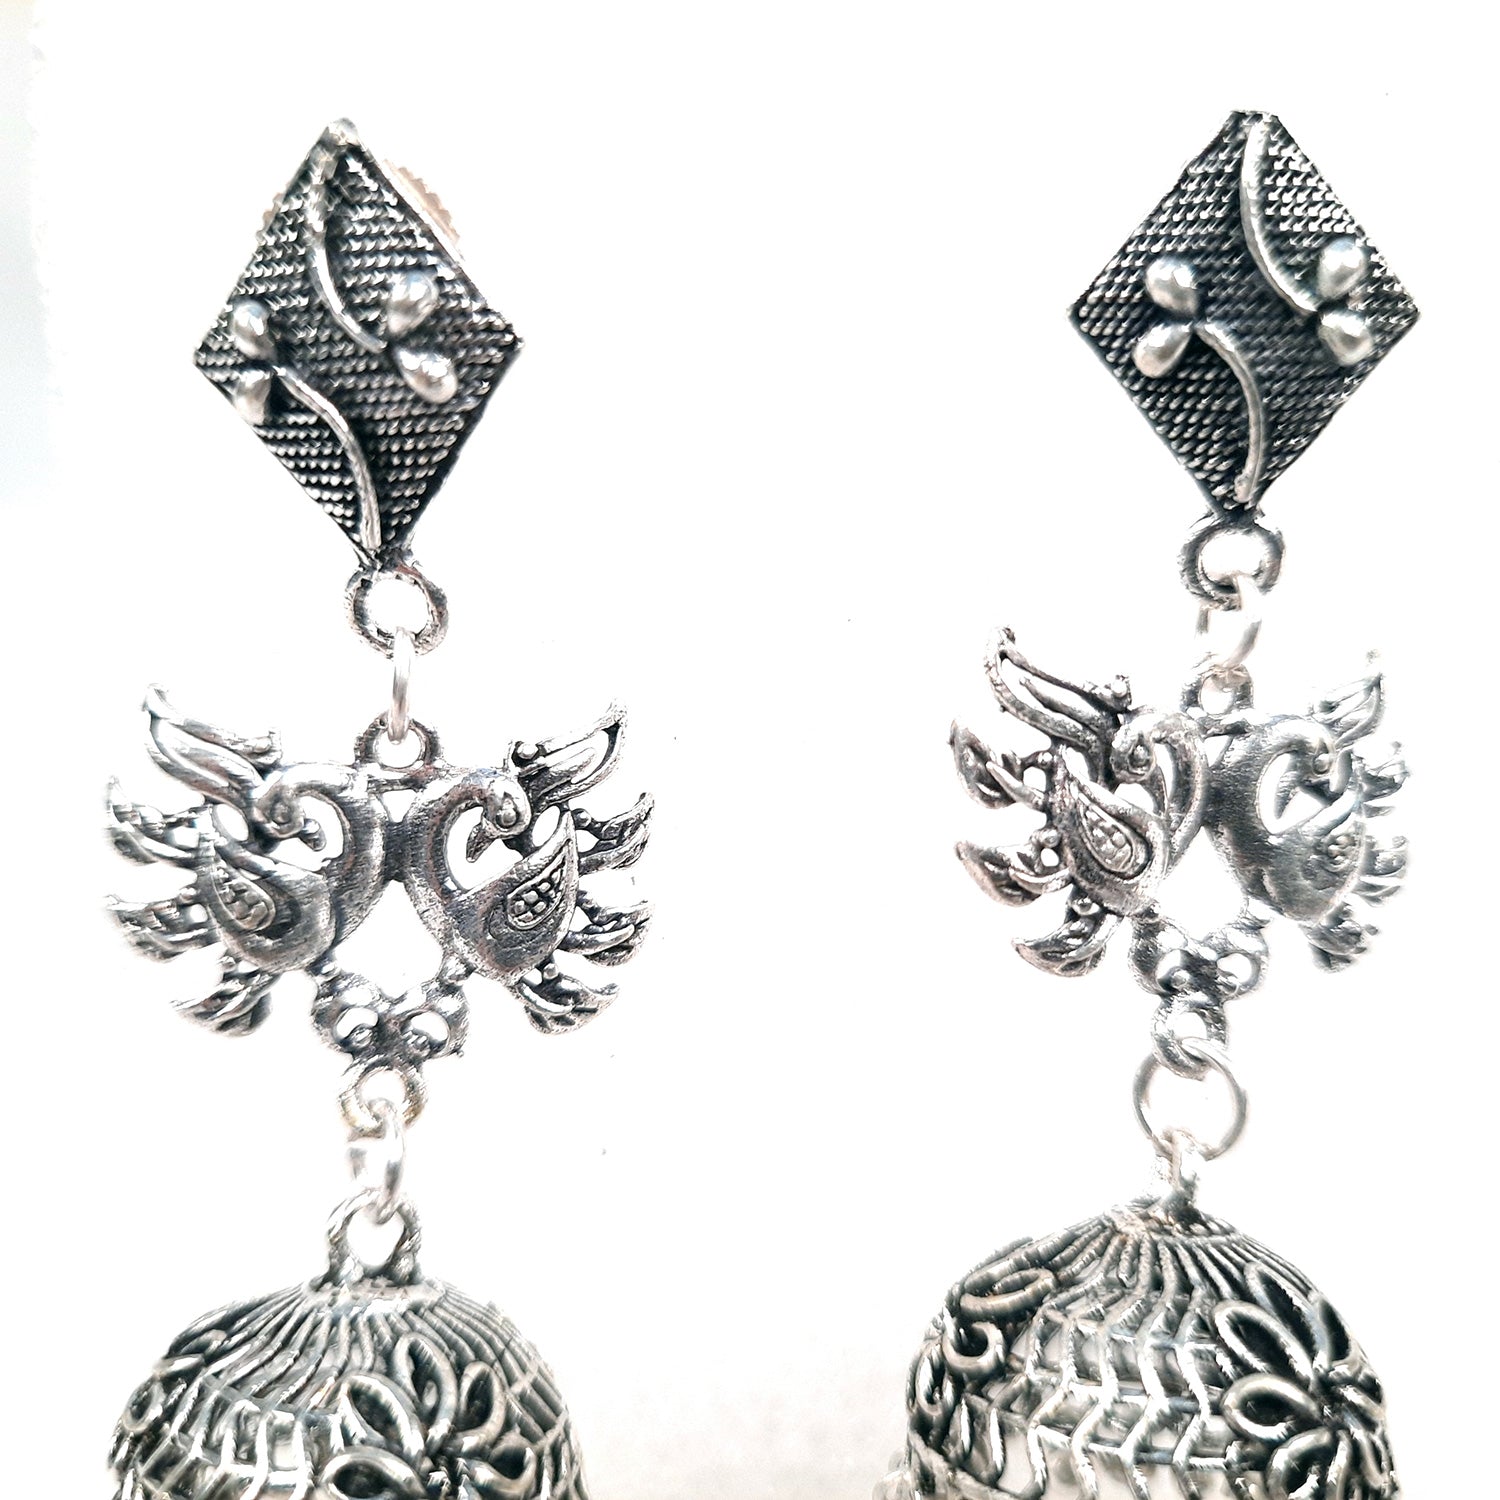 Oxidised Silver Plated Jhumka earrings for Girls and Women - Peacock Design | Latest Stylish Fashion Jewellery | Gifts for Her, Friendship Day, Valentine's Day Gift